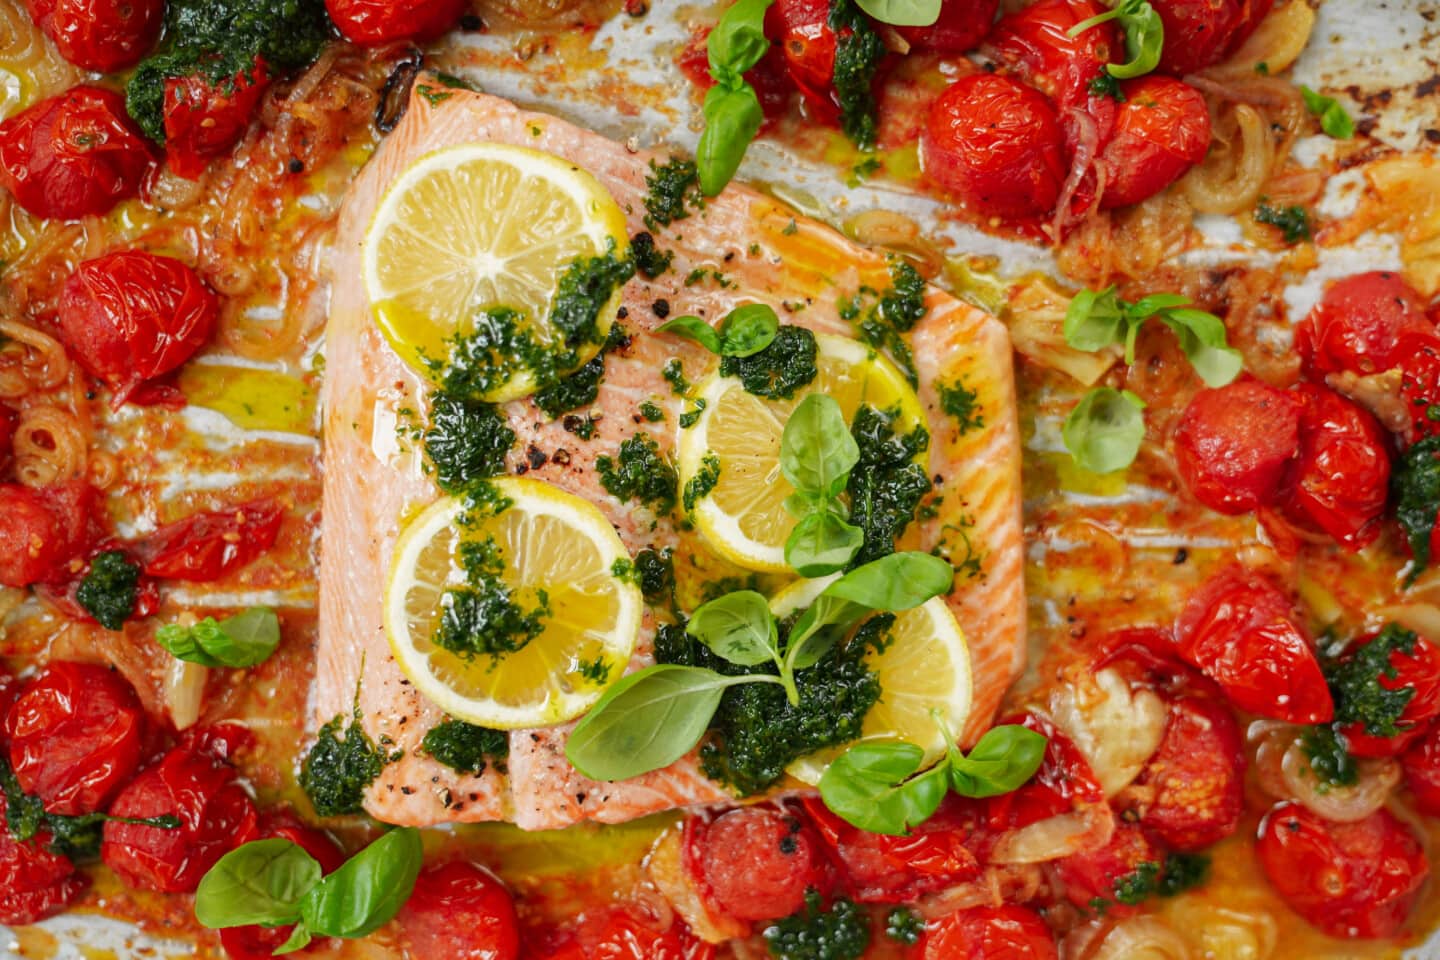 Oven baked fish surrounded by cherry tomatoes